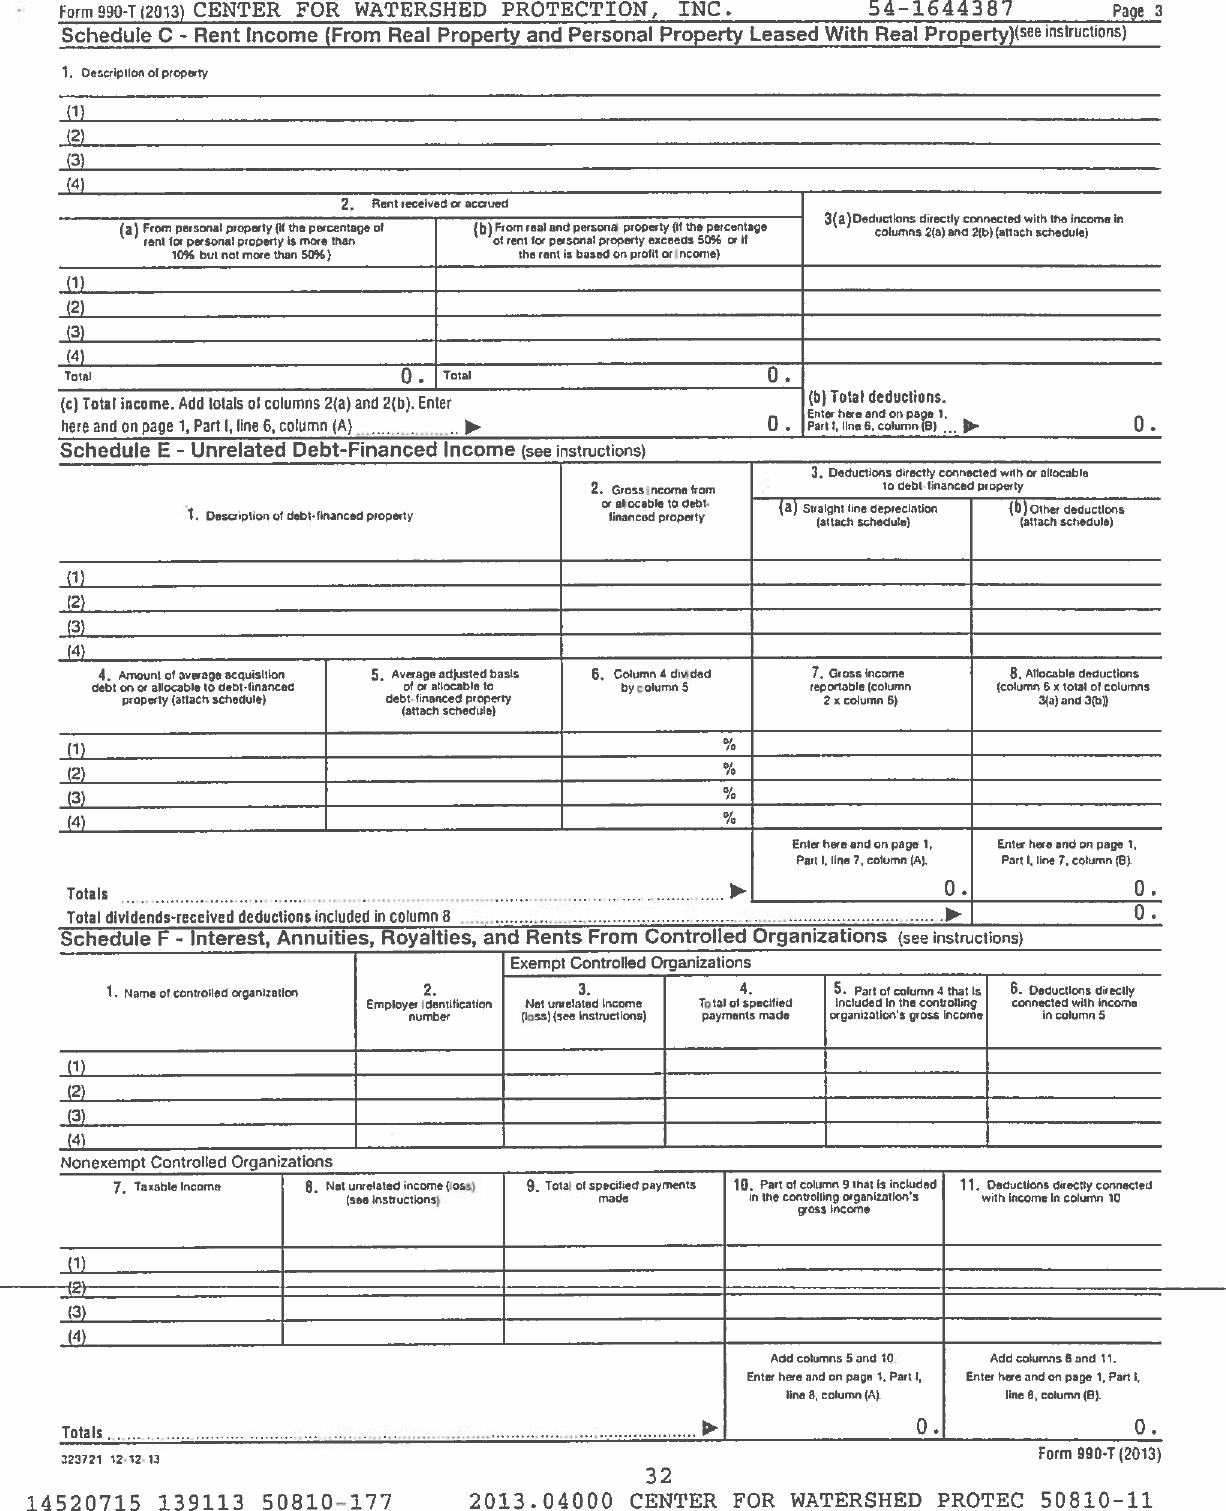 Page 3 of 5 - Form-990-T-2013